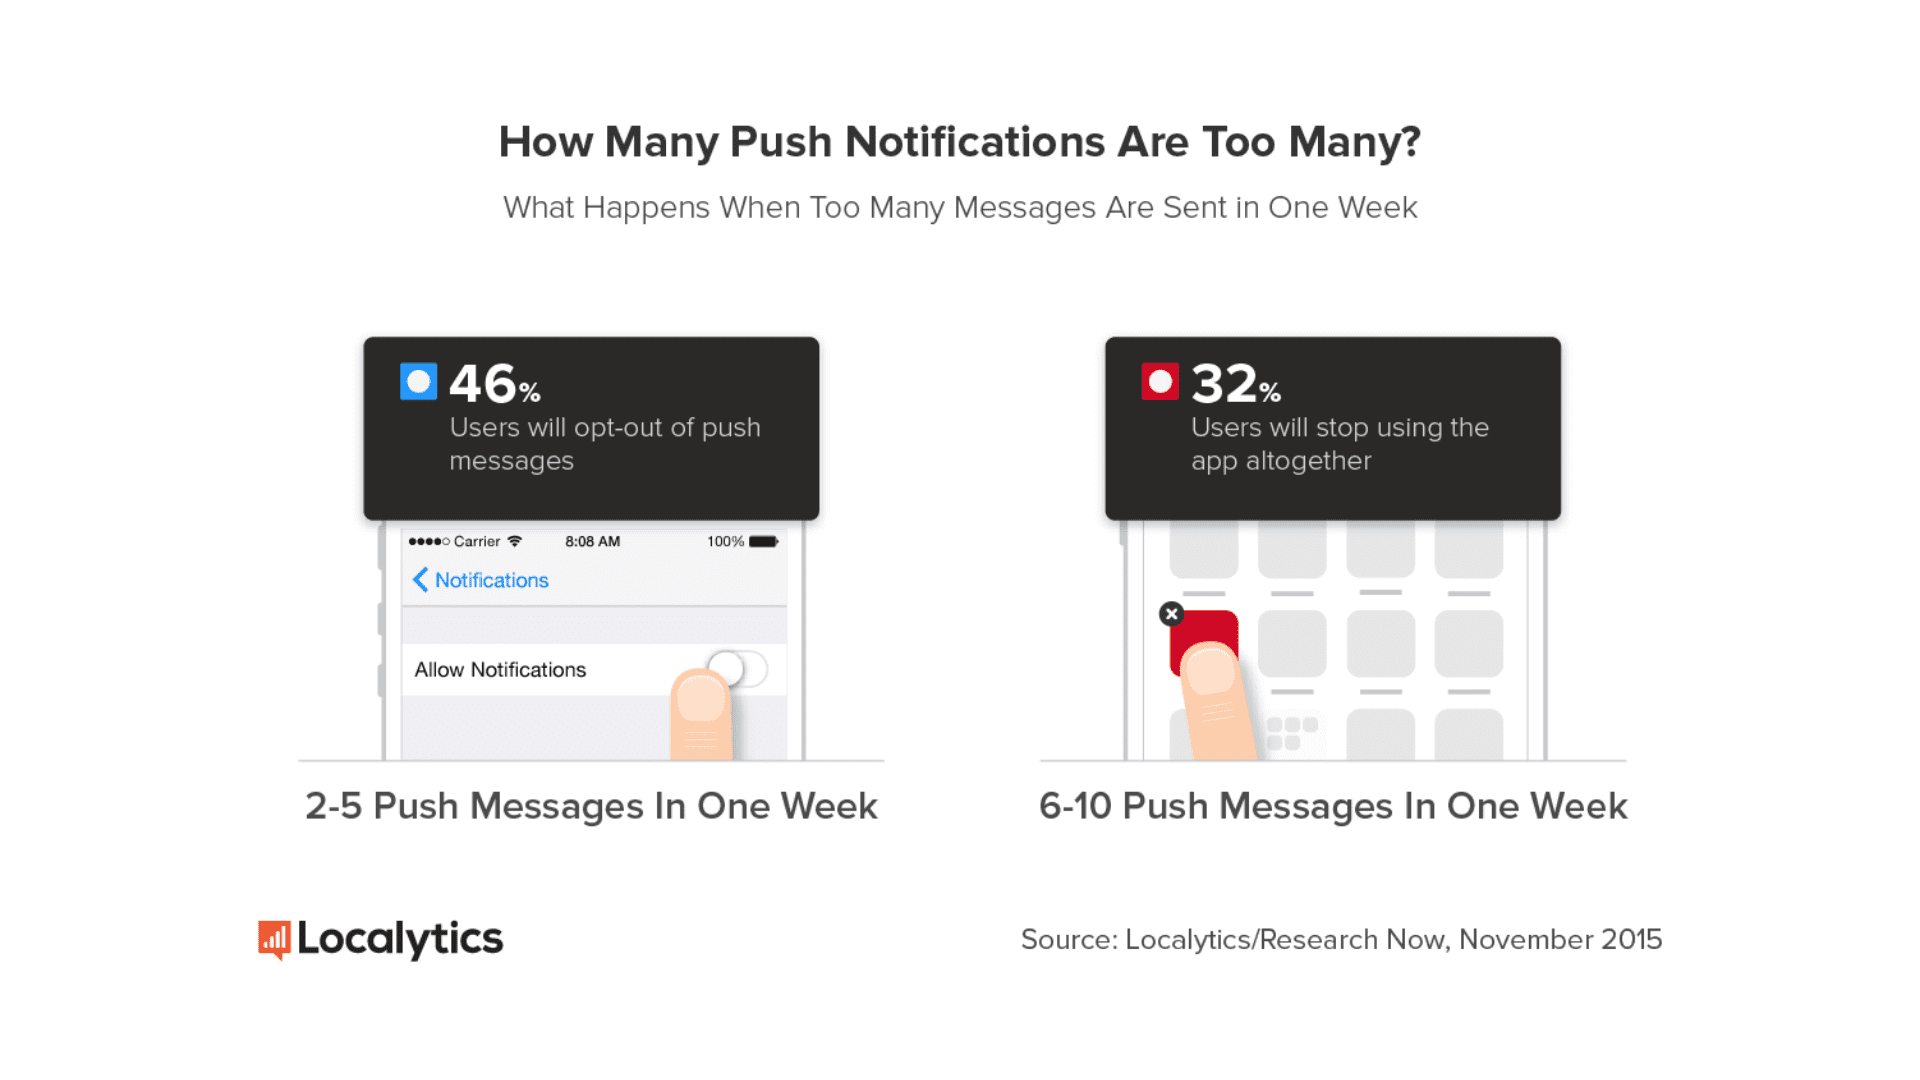 Don't send too many push notifications